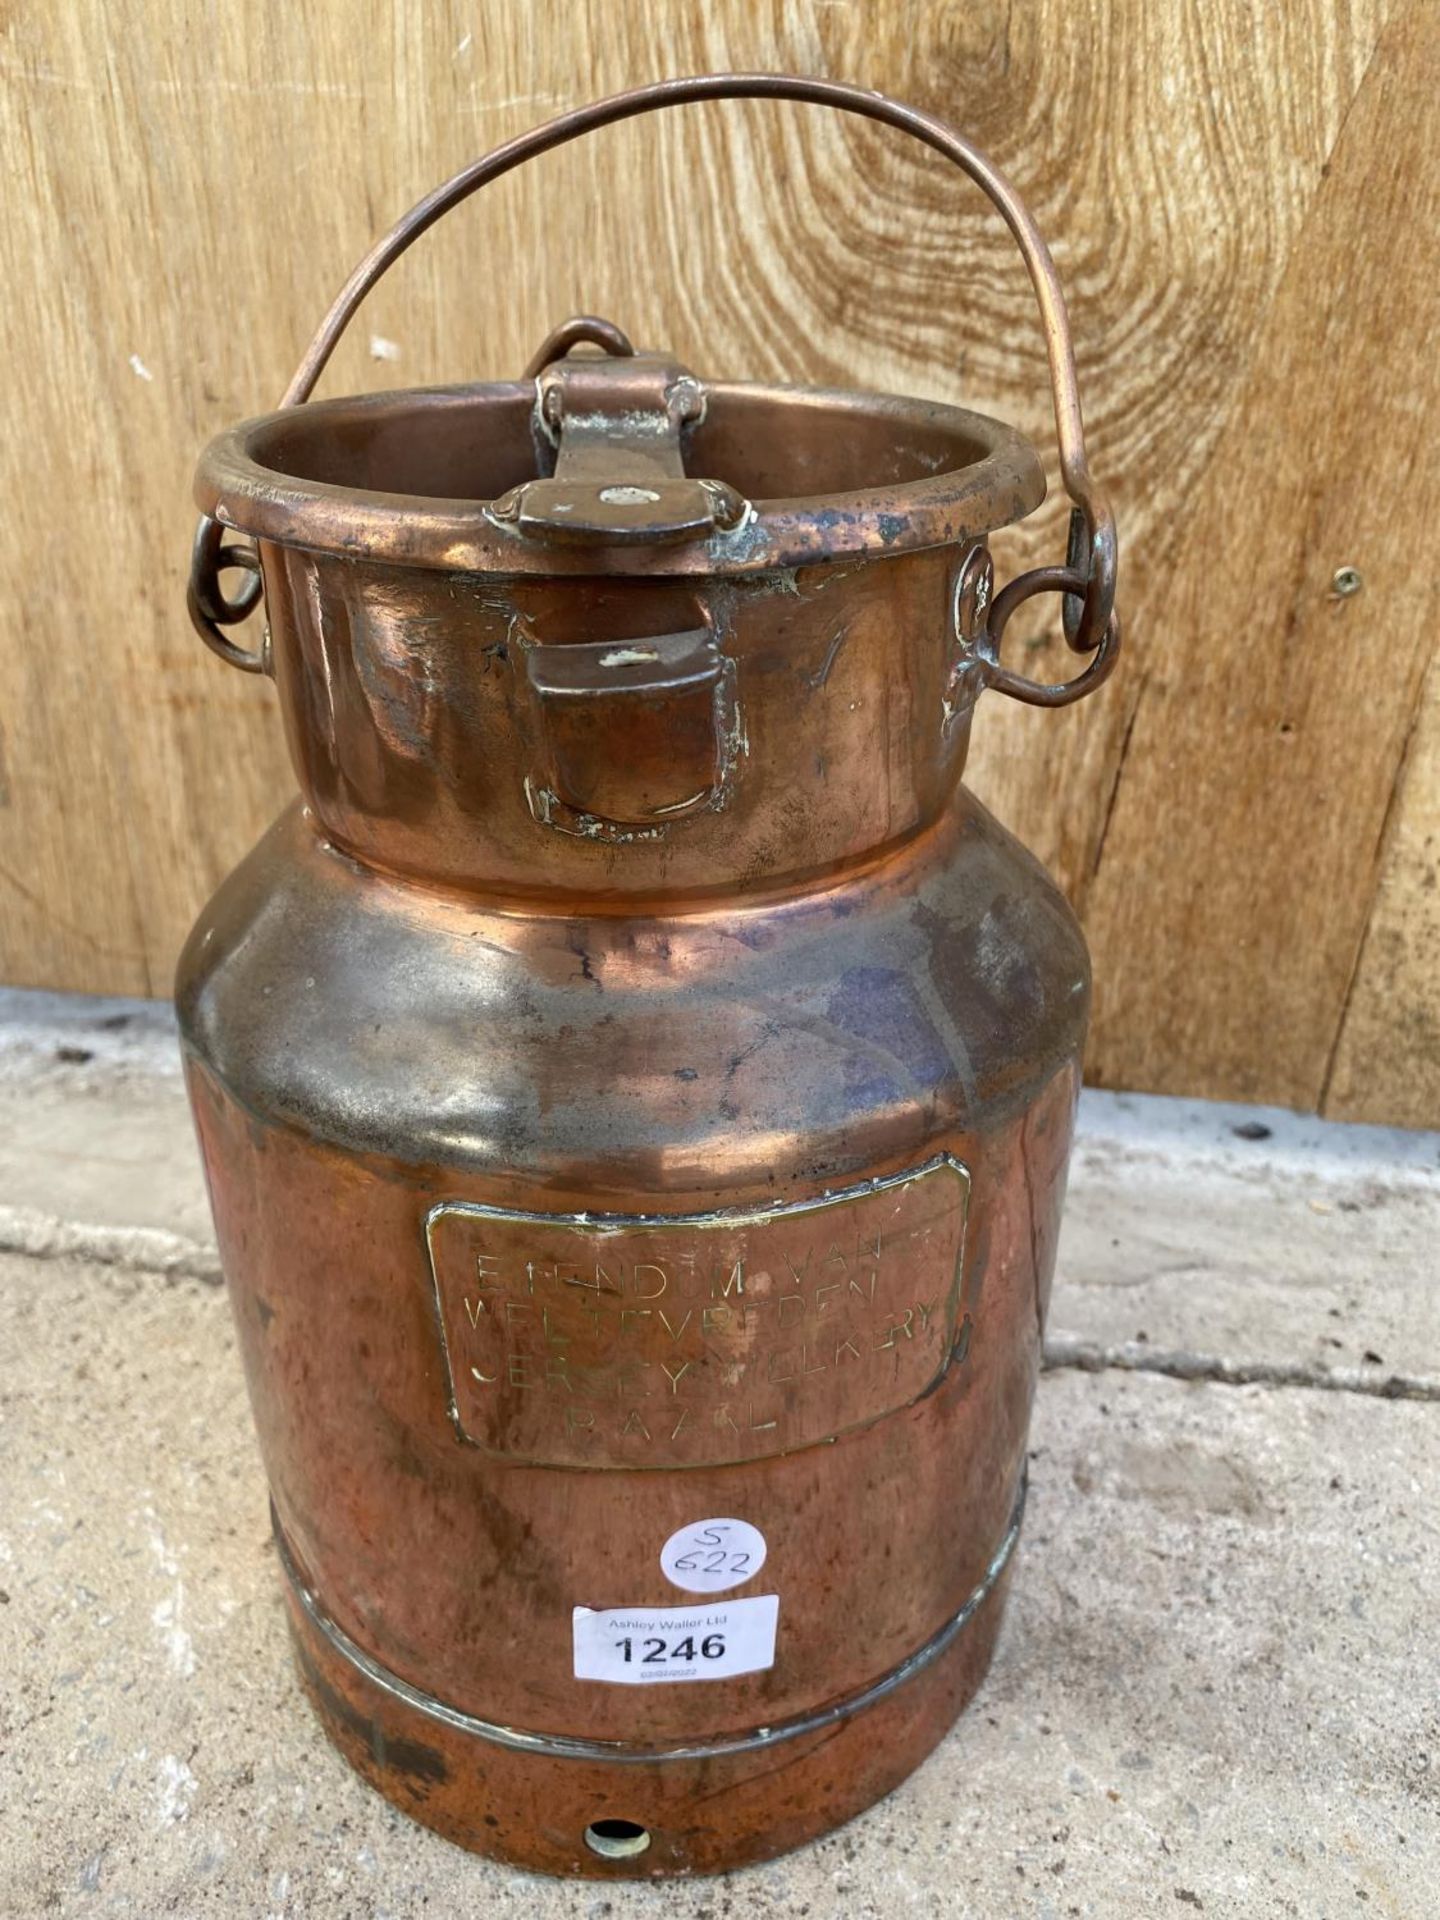 A SMALL VINTAGE COPPER MILK CHURN STAMPED 'JERSEY MELKERY'